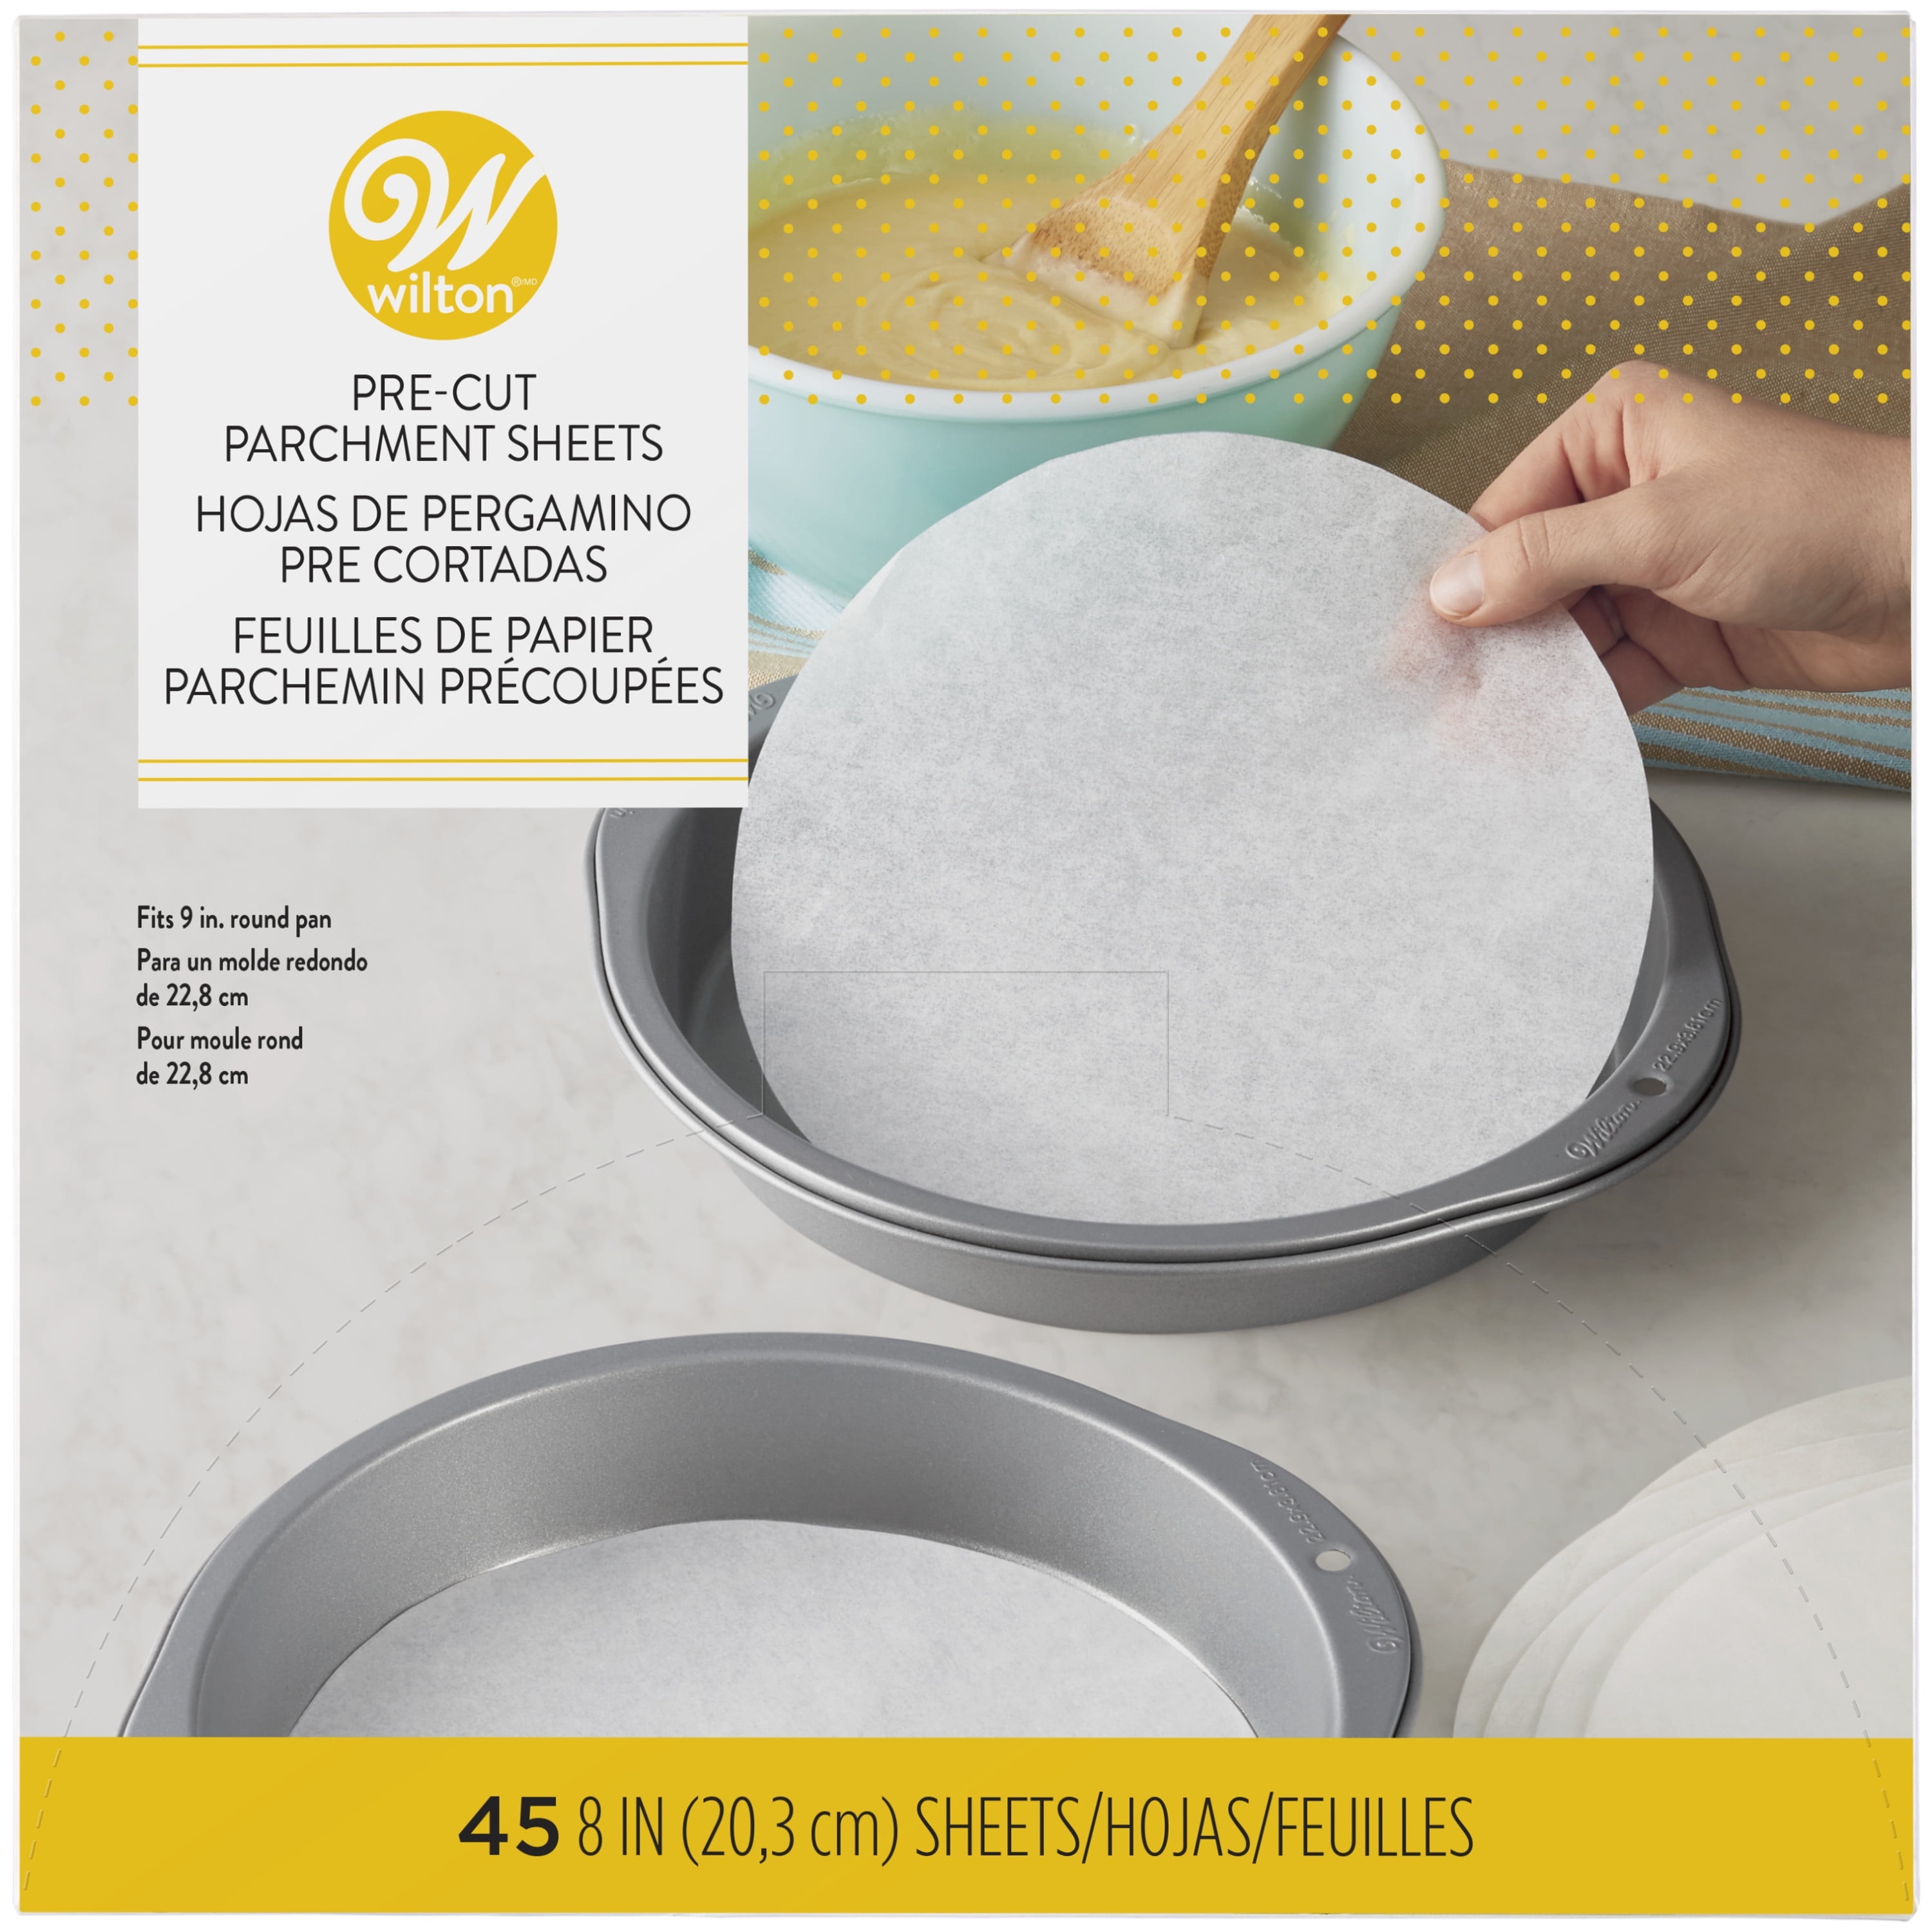 Pastry Tek White Paper Baking Paper Sheet - Precut, Silicone Coated - 5 inch x 5 inch - 1000 Count Box